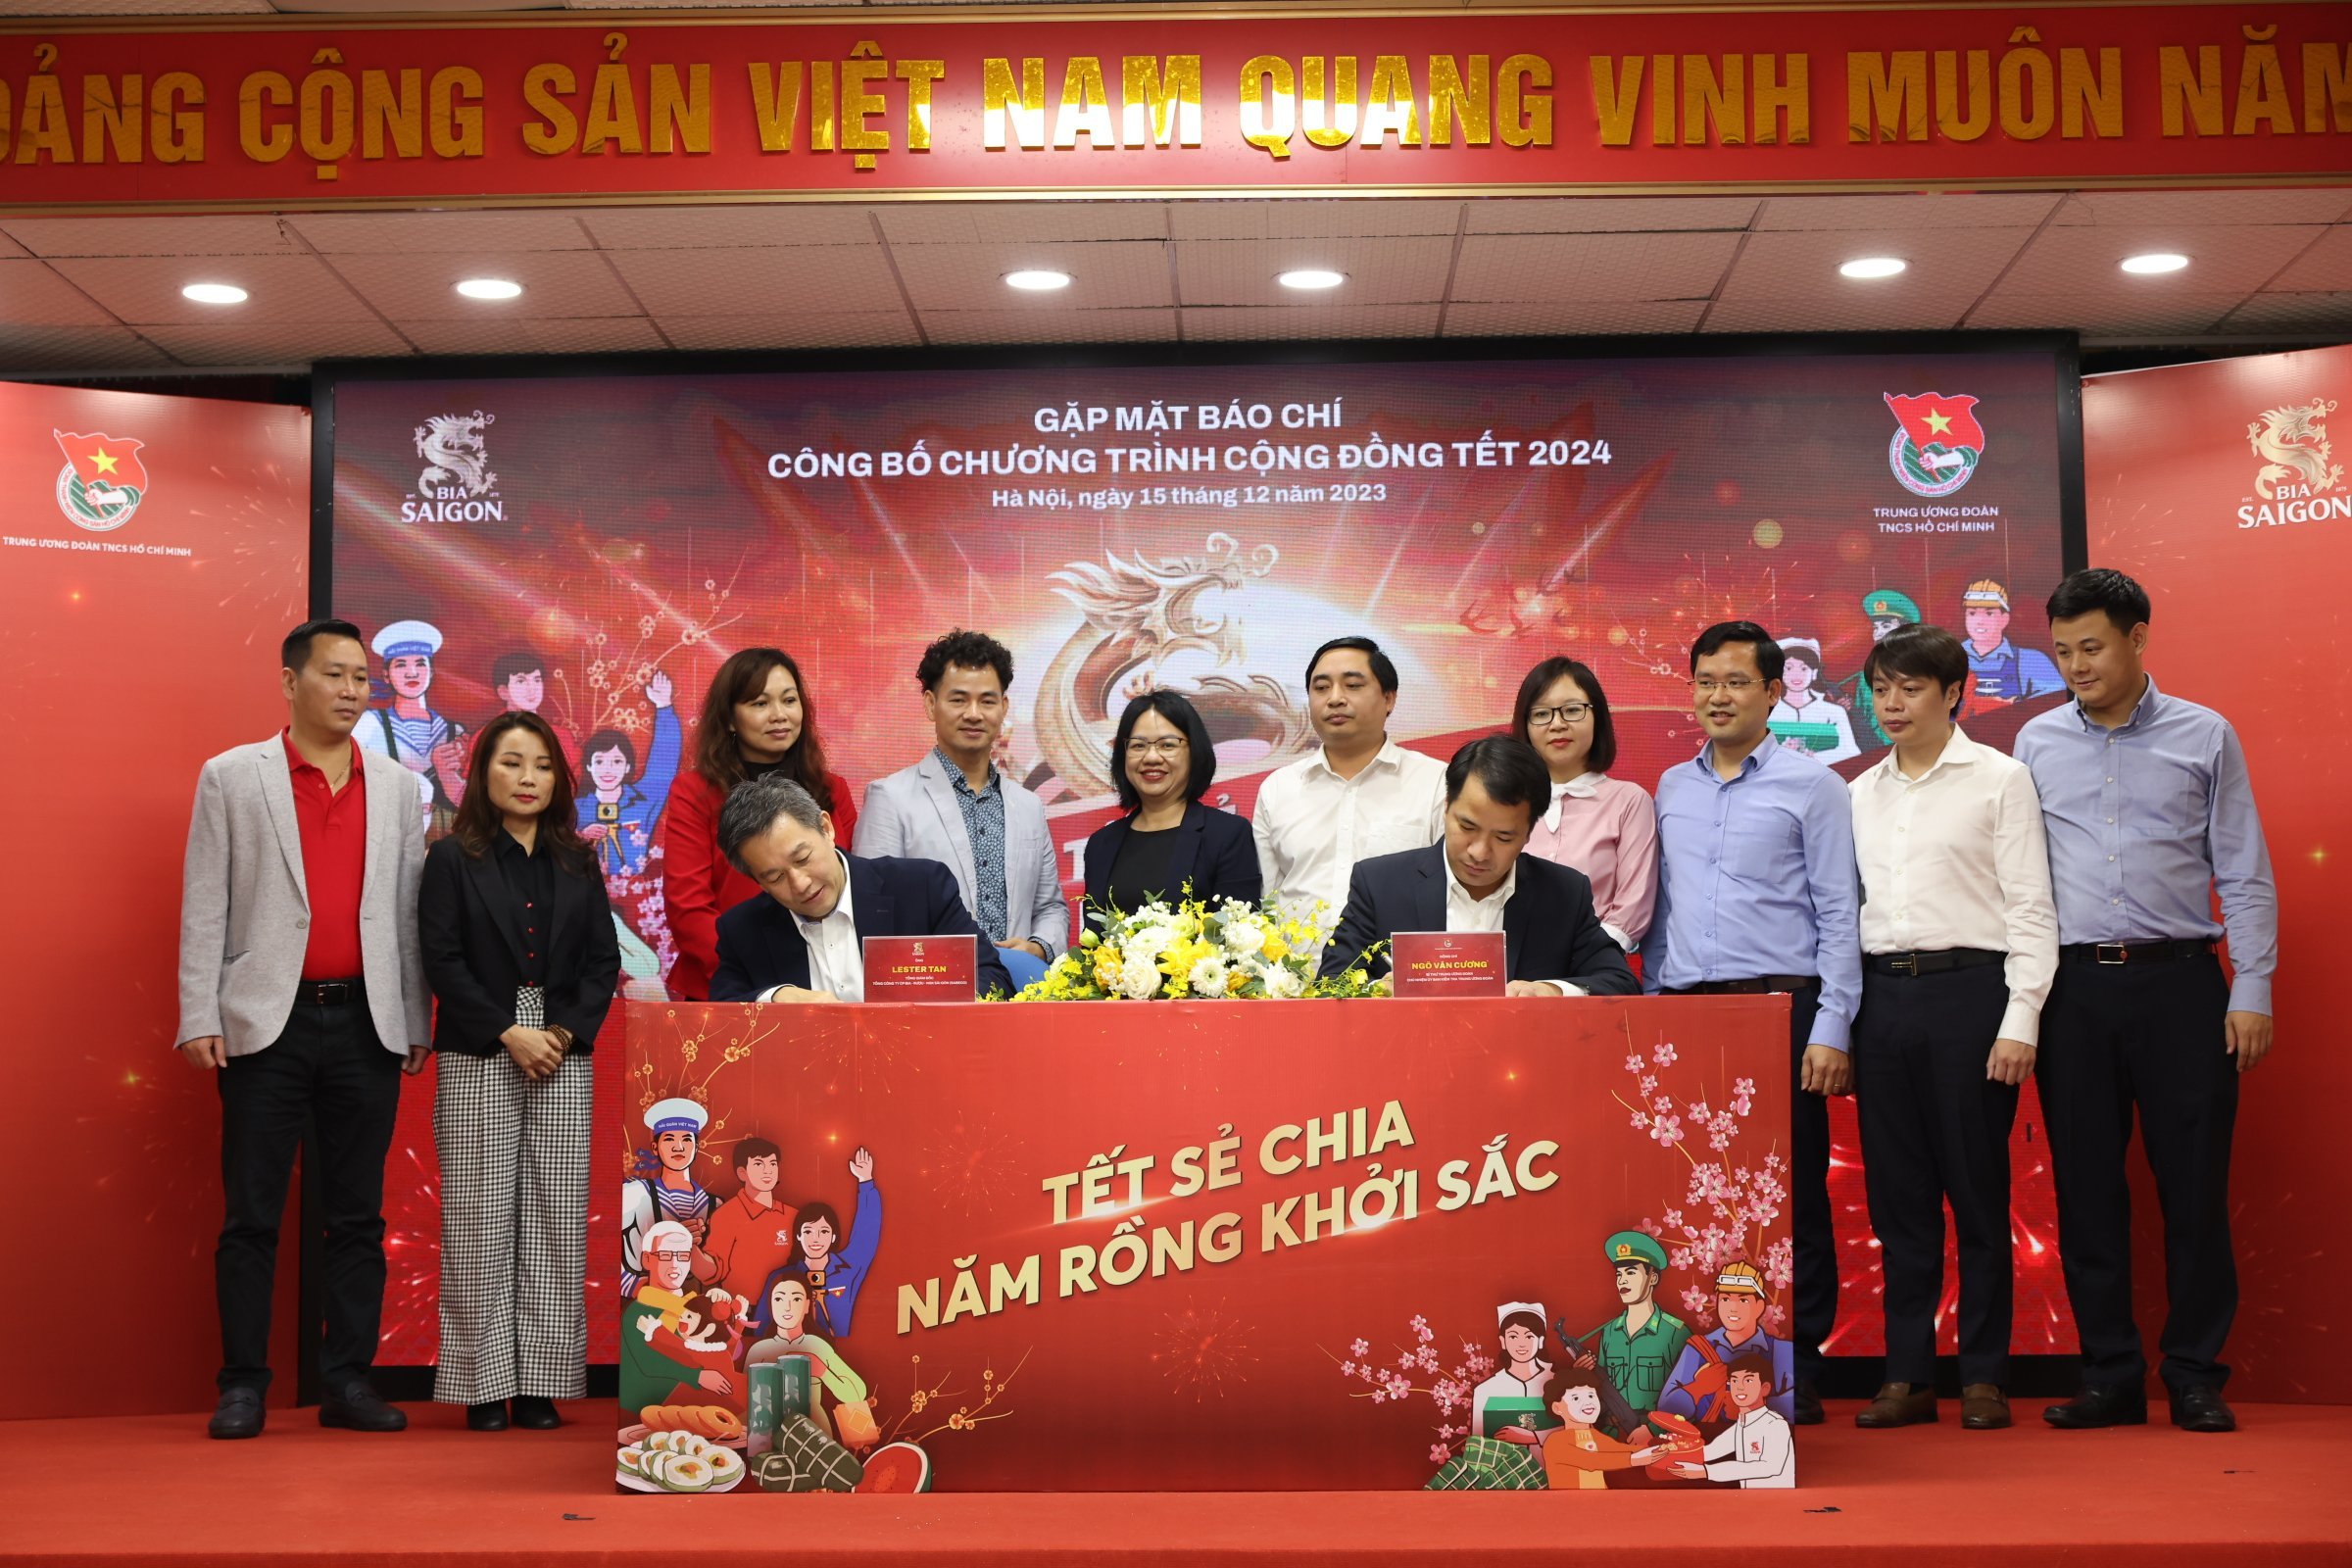 BIA SAIGON AND HO CHI MINH COMMUNIST YOUTH UNION UNVEIL 2024 COMMUNITY PROGRAM, BRINGING FESTIVE SUPPORT TO OVER 10,400 INDIVIDUALS ACROSS 25 PROVINCES NATIONWIDE